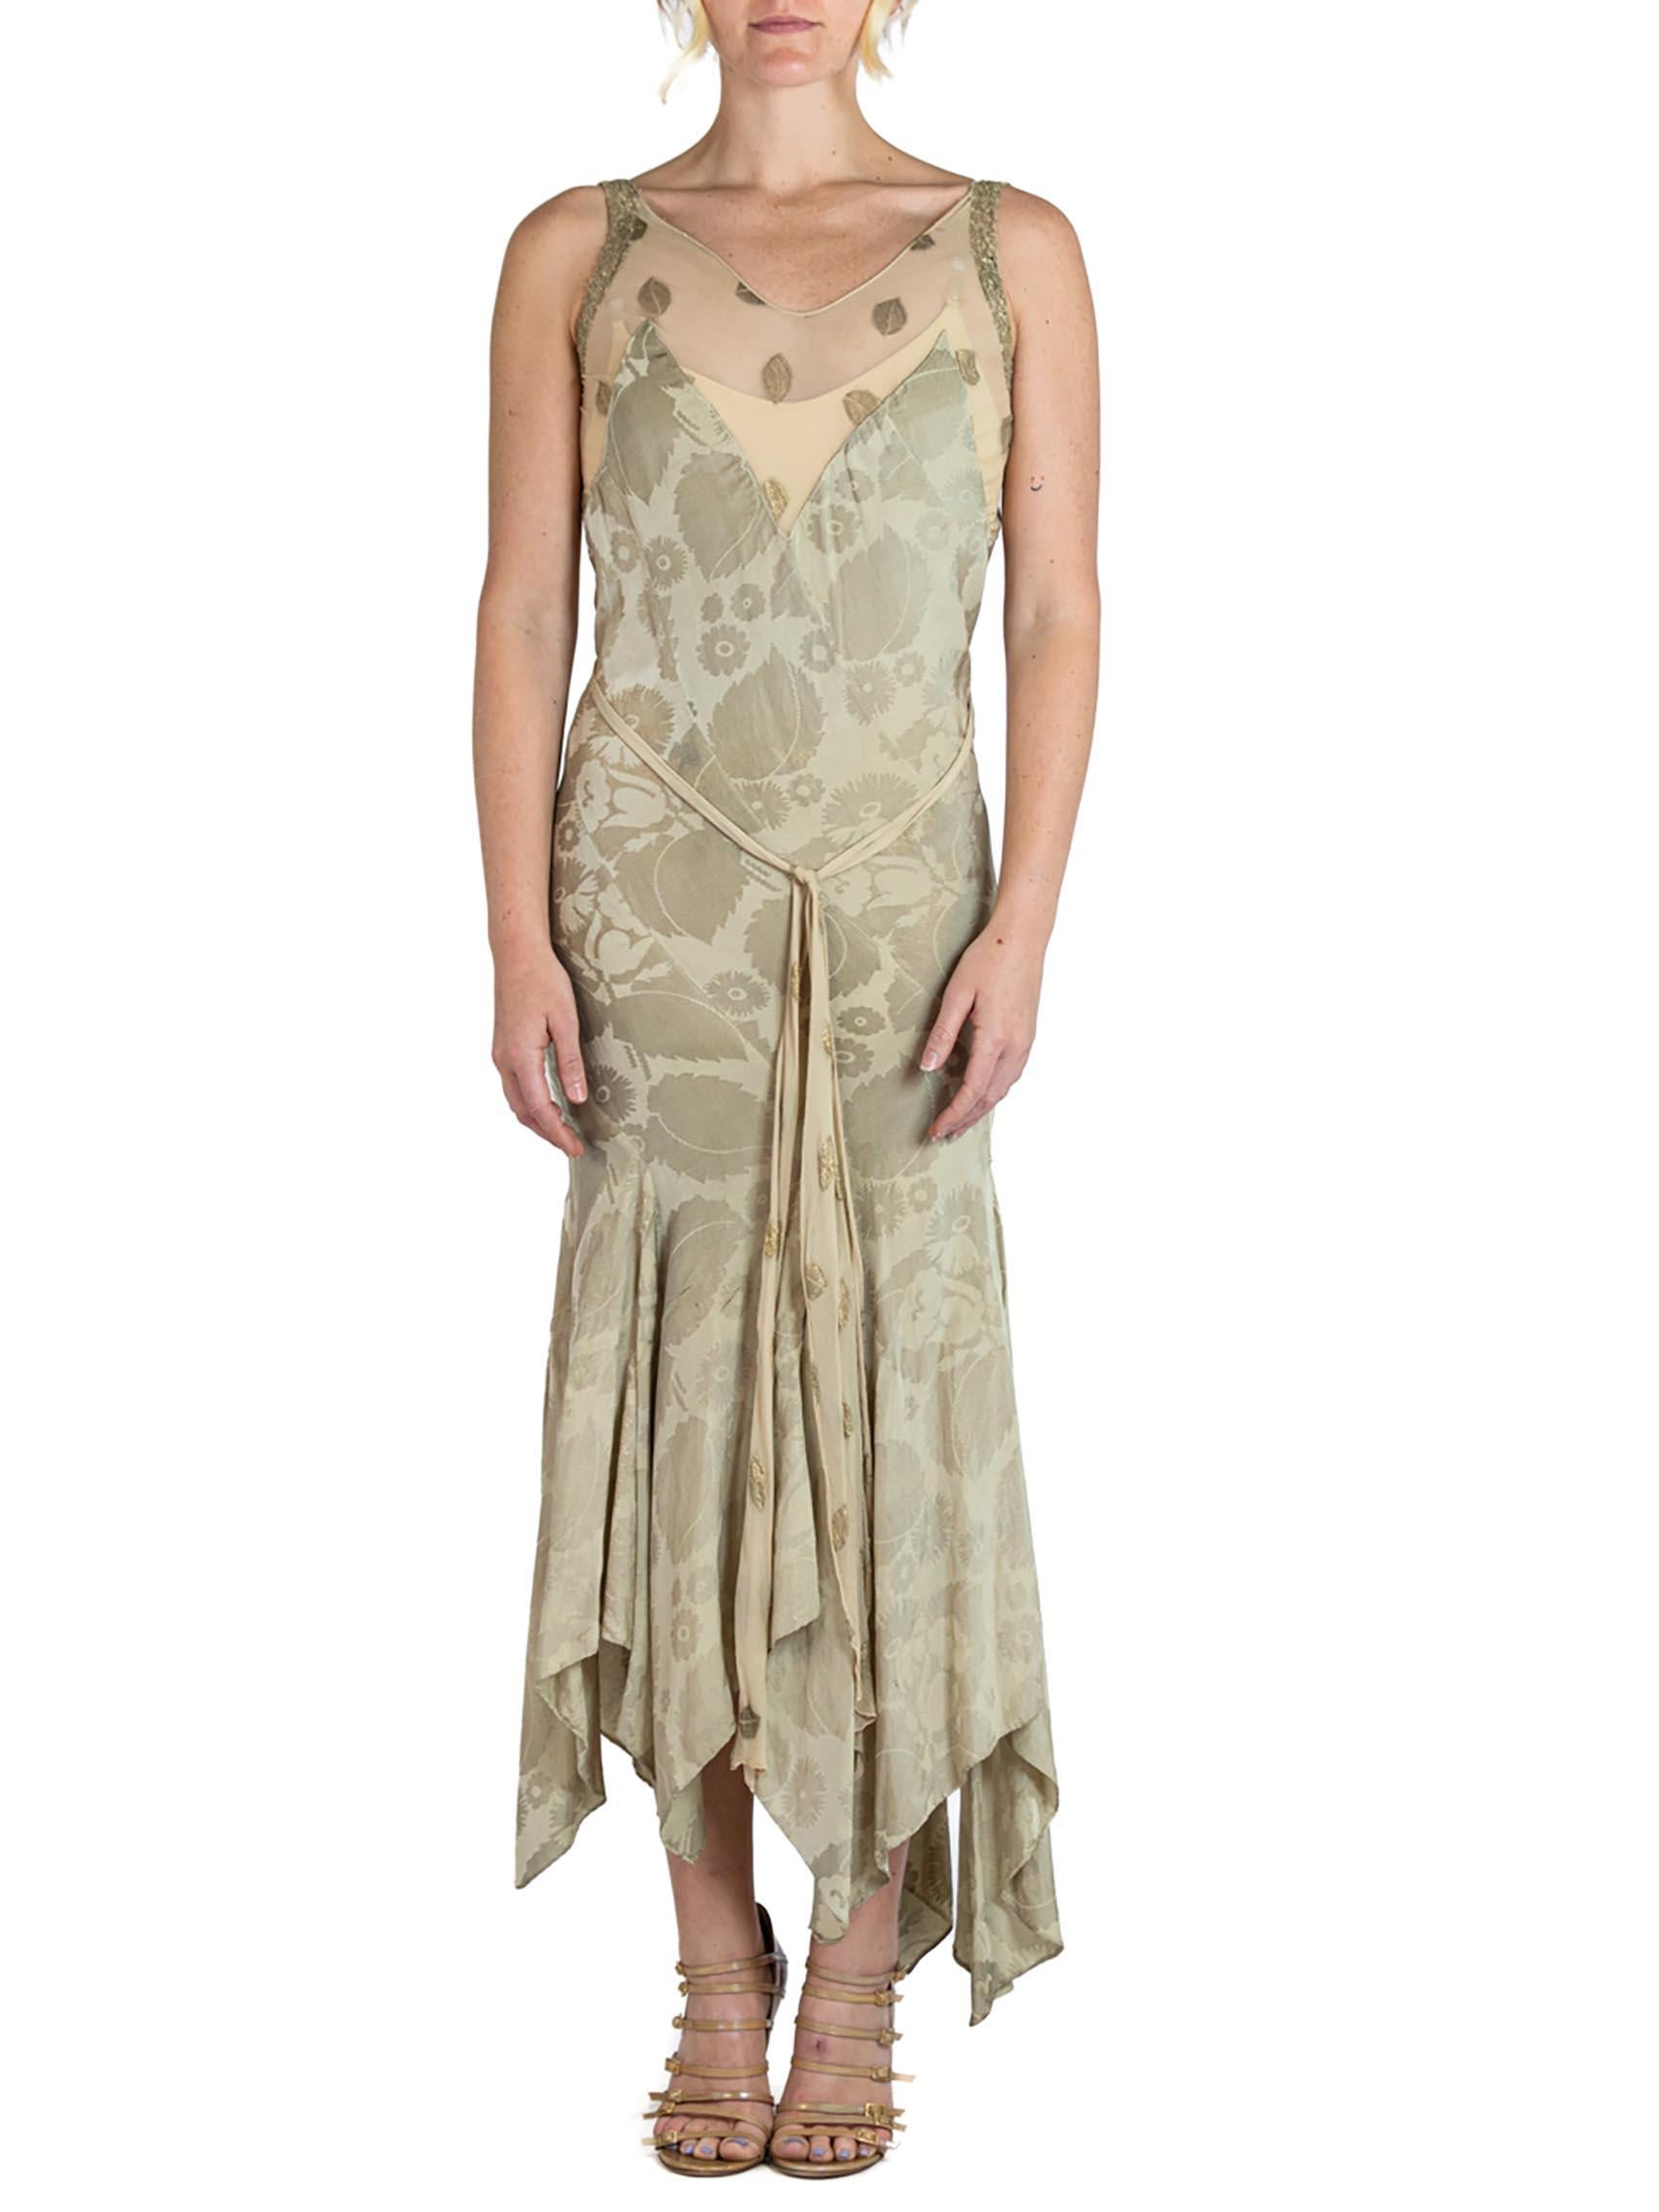 1930S Bias Cut Silk Silver Lamé Floral Jacquard Old Hollywood Gown With Chiffon Waist Tie